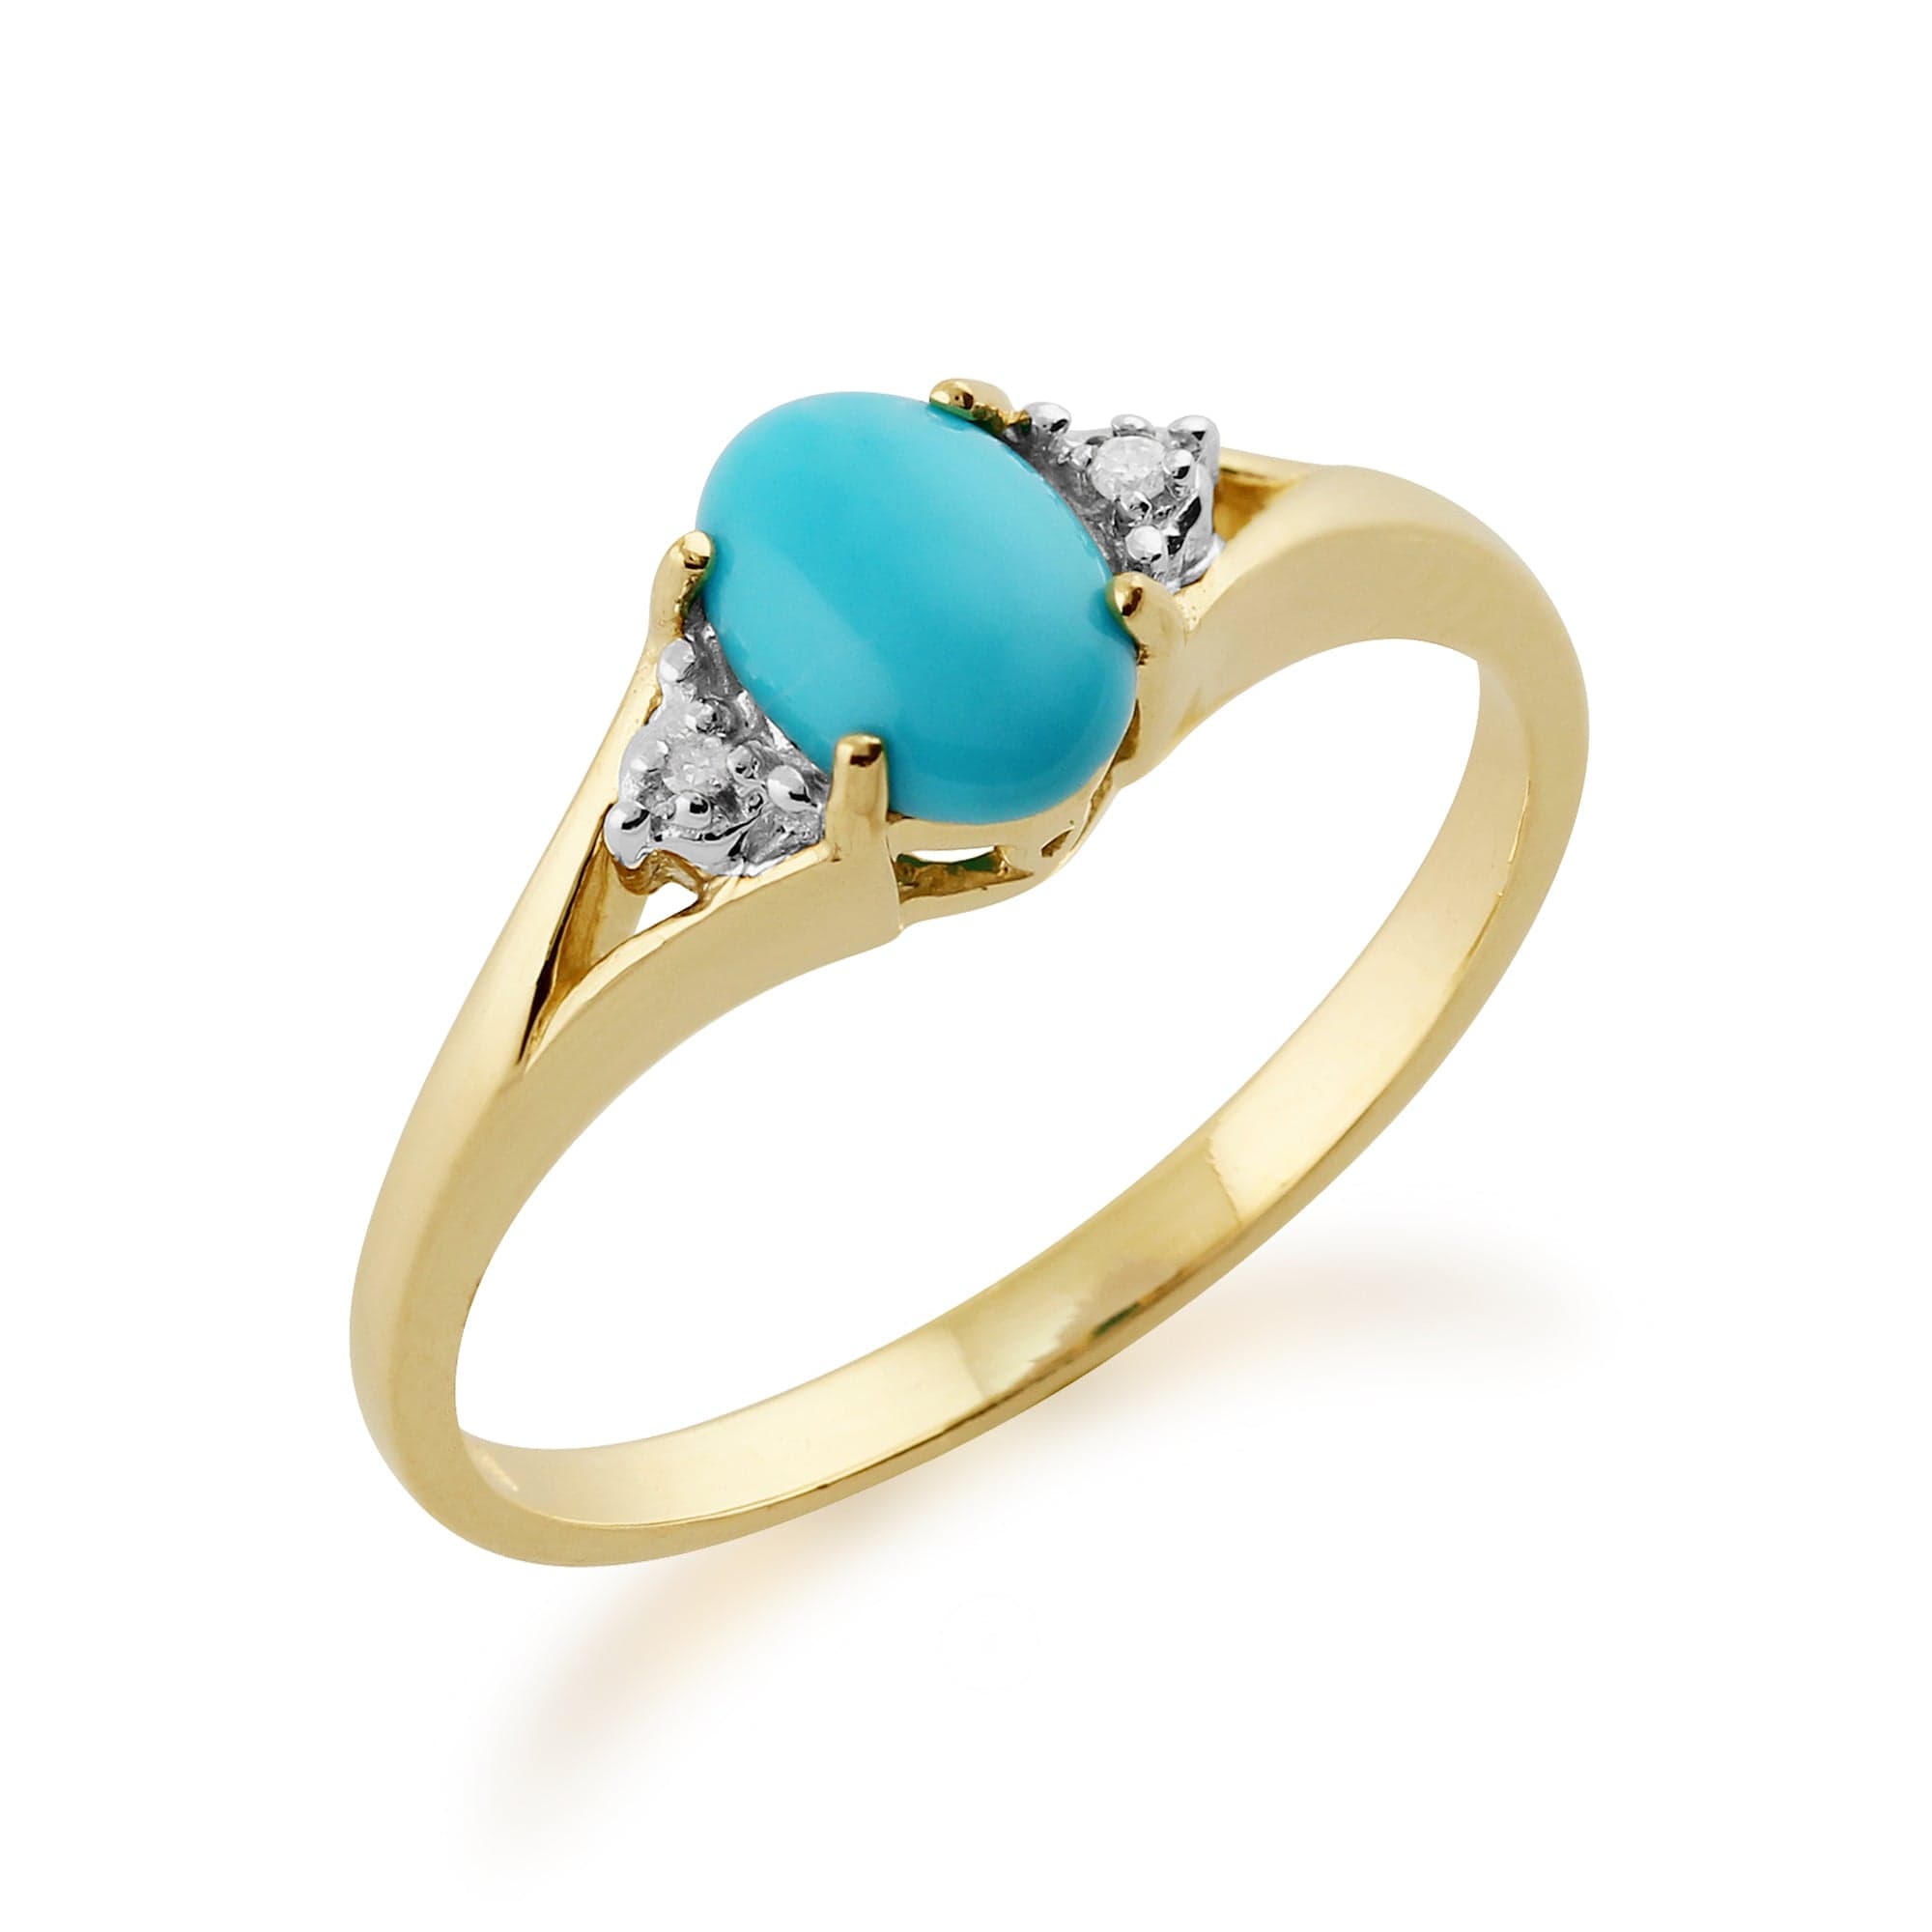 181R0748529 Classic Oval Turquoise & Diamond Ring in 9ct Yellow Gold 2